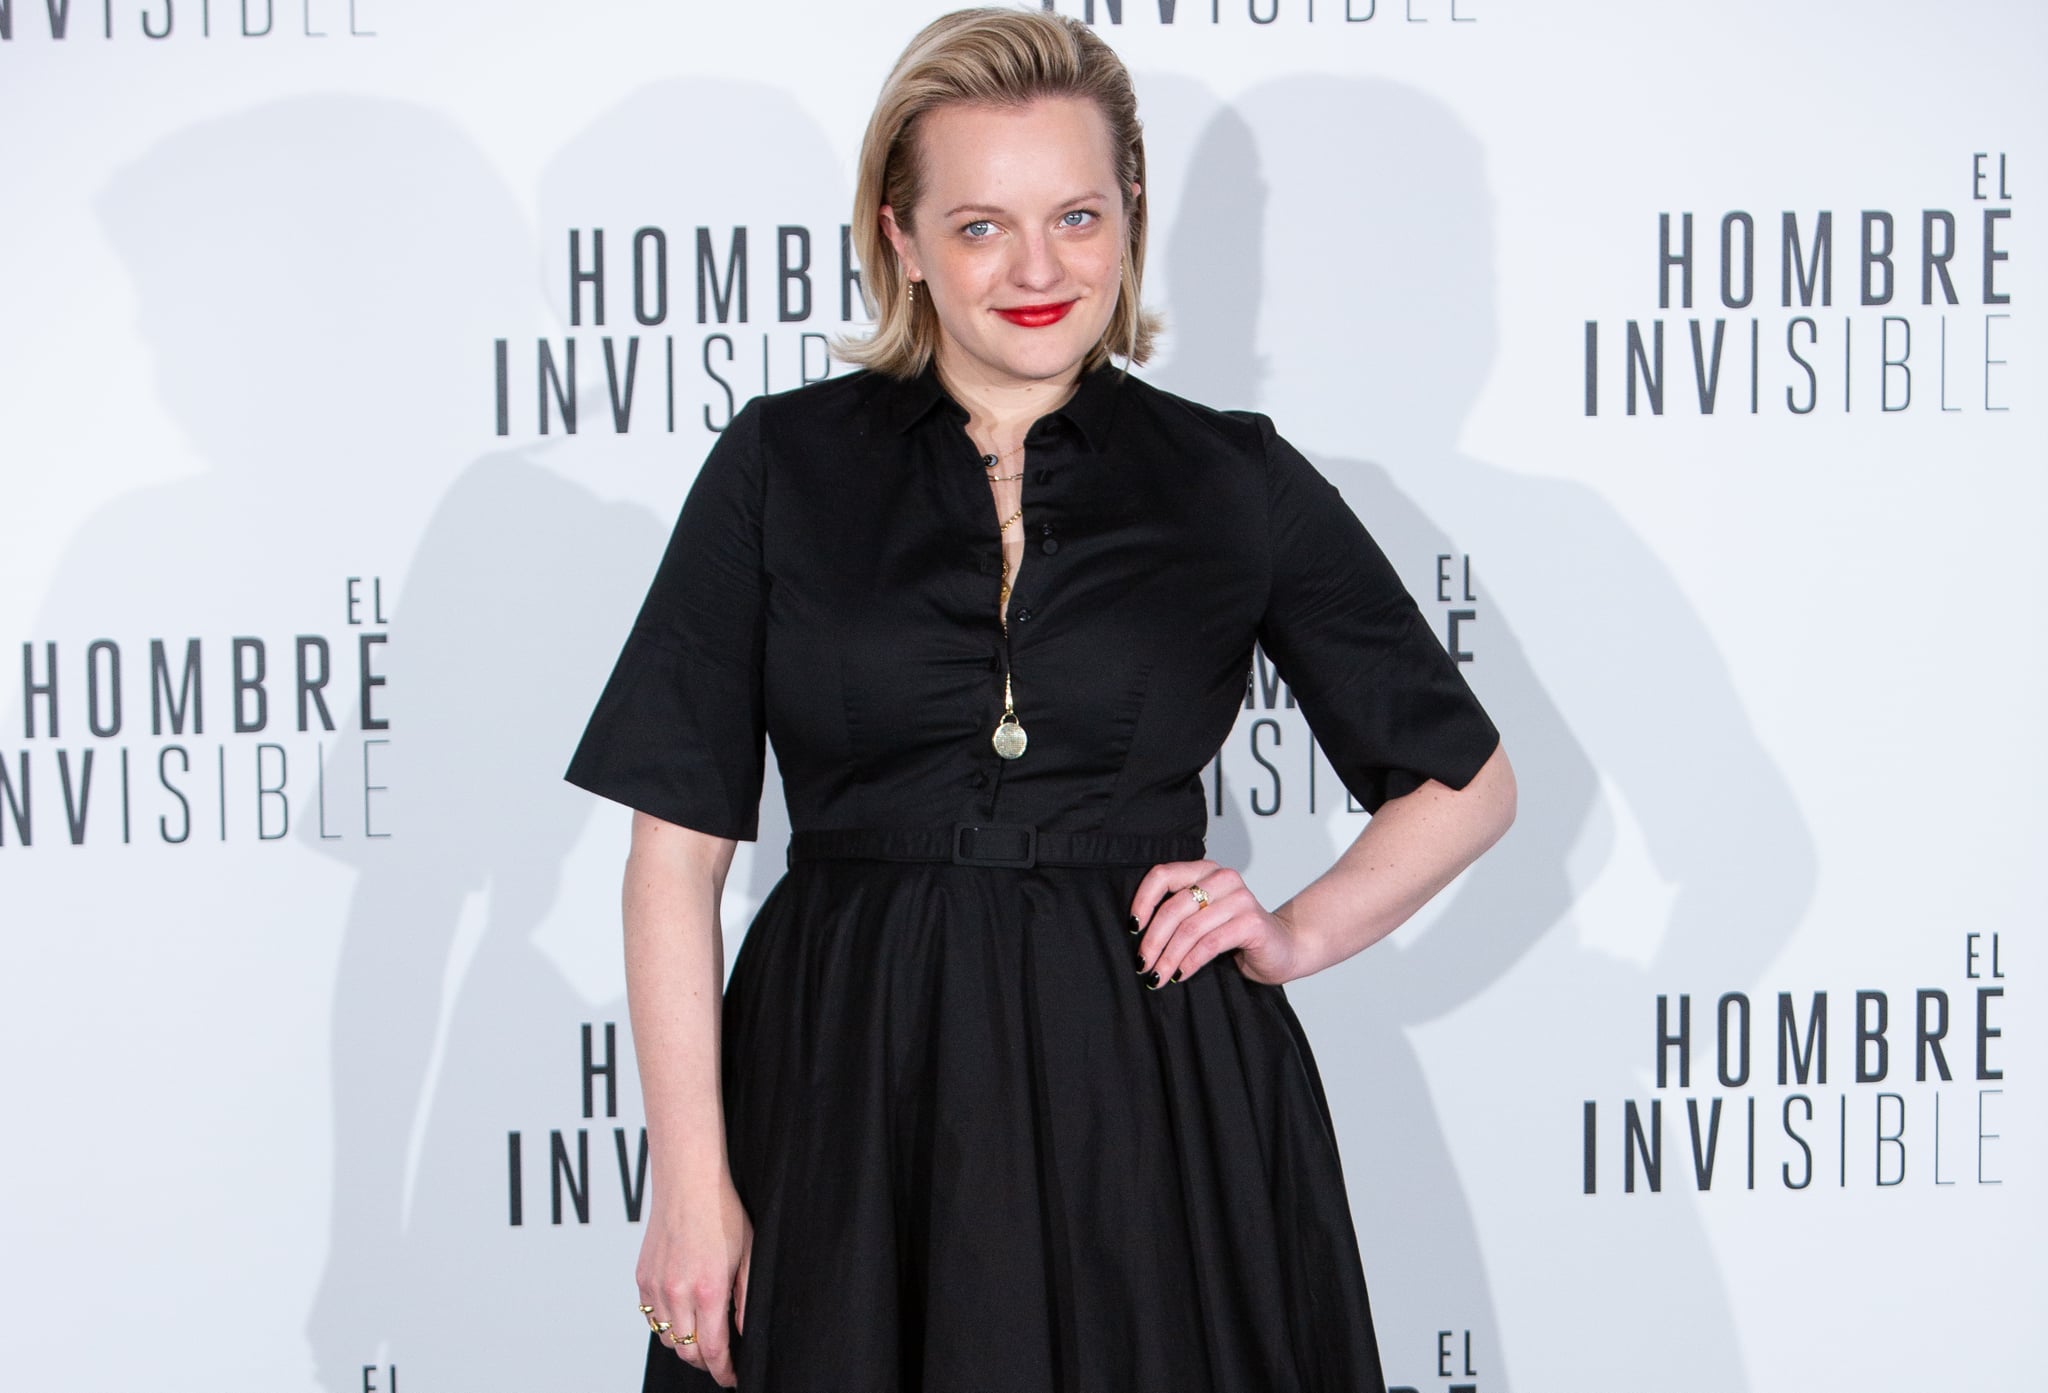 MADRID, SPAIN - FEBRUARY 19: US actress Elisabeth Moss attends 'El Hombre Invisible' ('Invisible Man') photocall at Villa Magna Hotel on February 19, 2020 in Madrid, Spain. (Photo by Pablo Cuadra/FilmMagic)